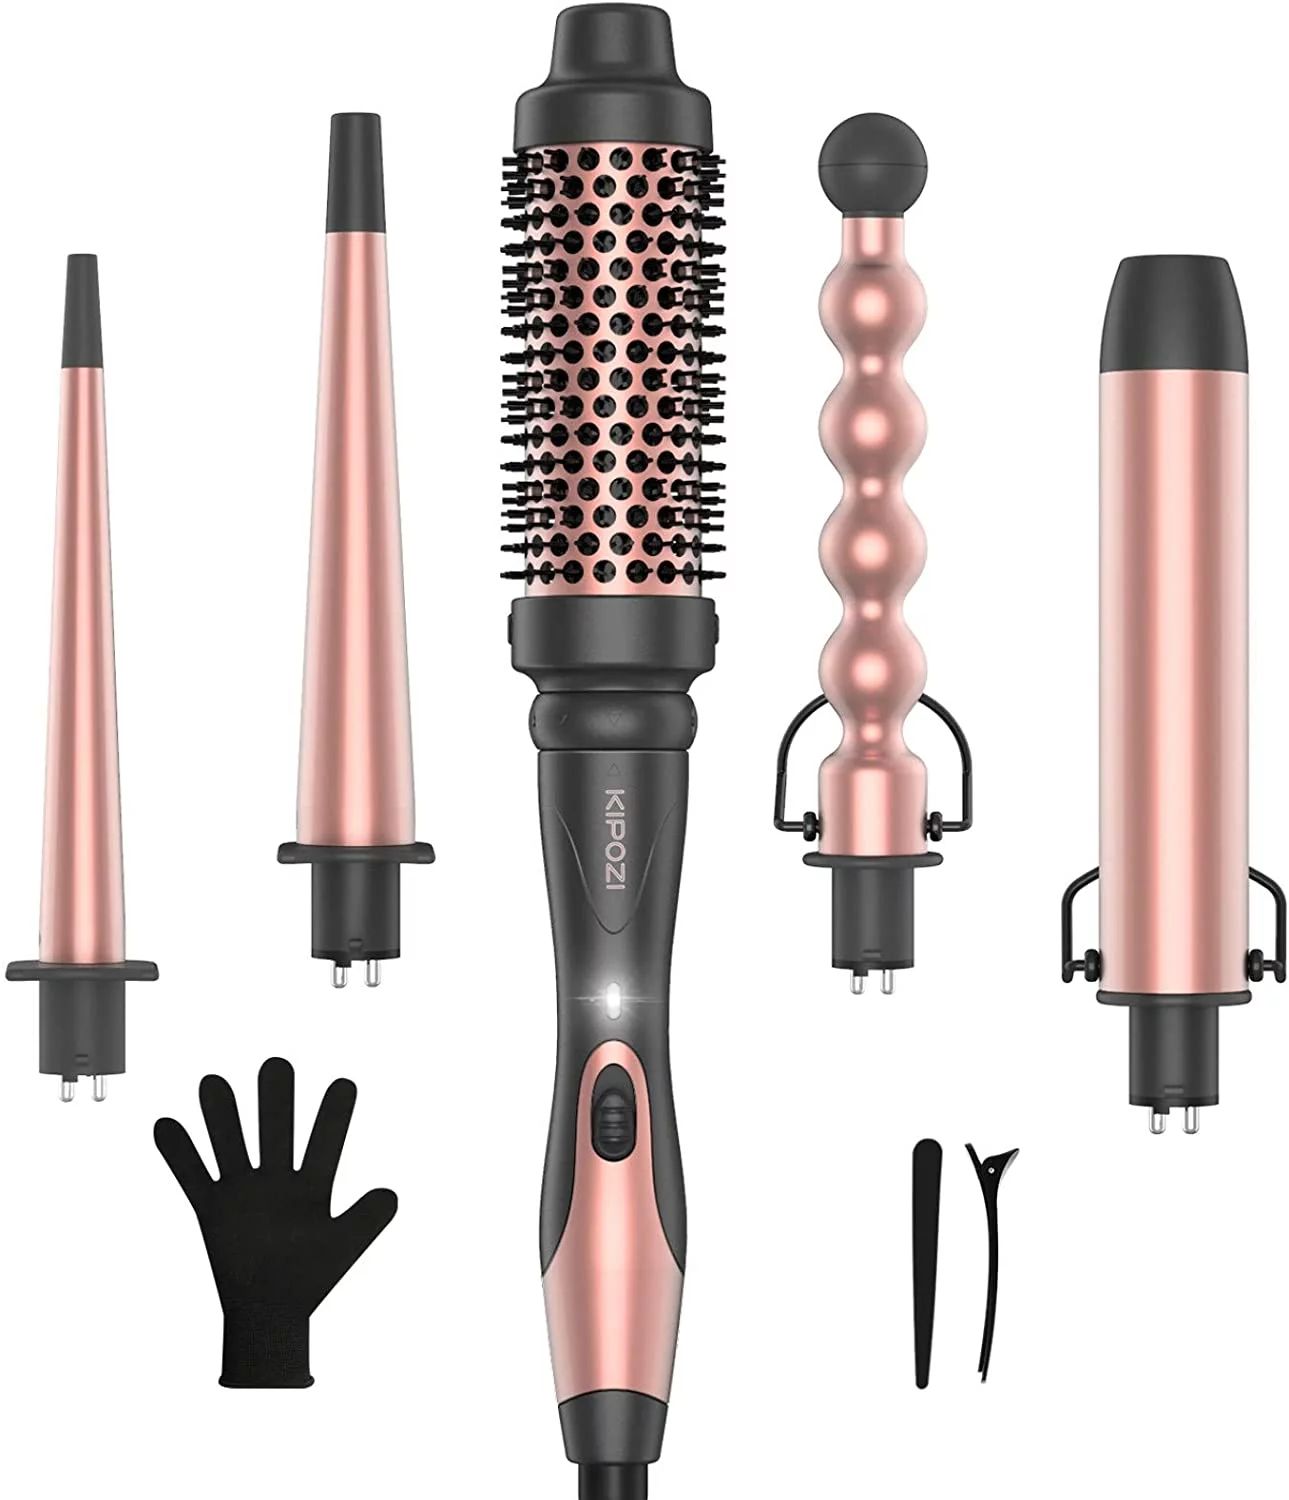 Kipozi 5 in 1 Curling Iron Wand Set, Instant Heating, with 4 Ceramic Barrels and 1 Curling Iron B... | Walmart (US)